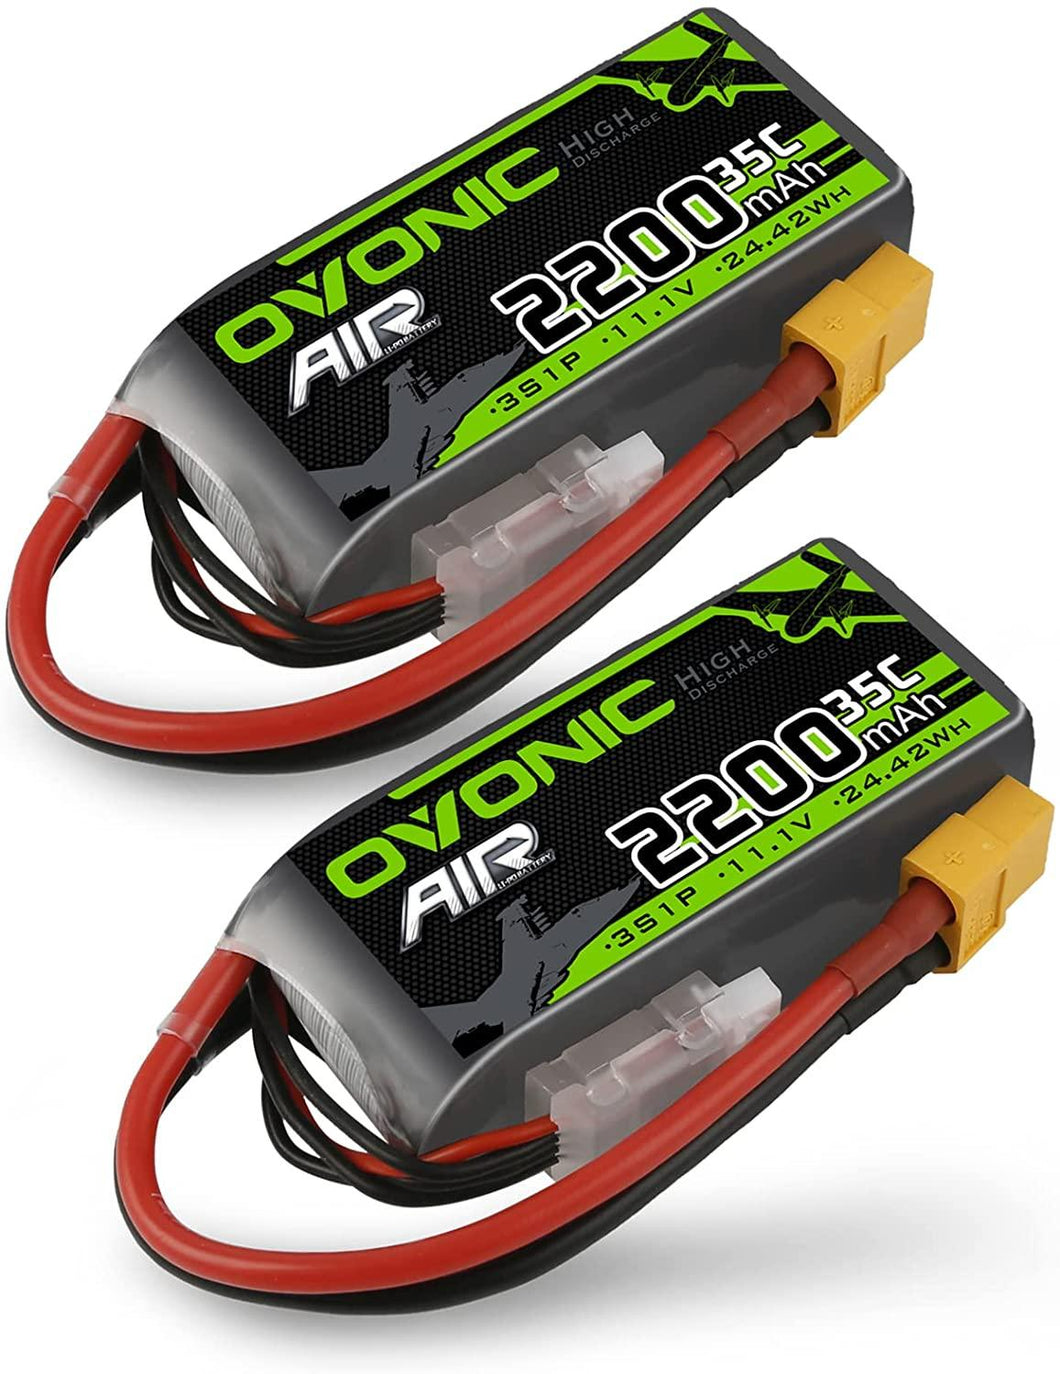 OVONIC 3s Lipo Battery 35C 2200mAh 11.1V Lipo Battery with XT60 Connector for Airplane RC Quadcopter Helicopter FPV Drone(2pcs) - Hobby Shop